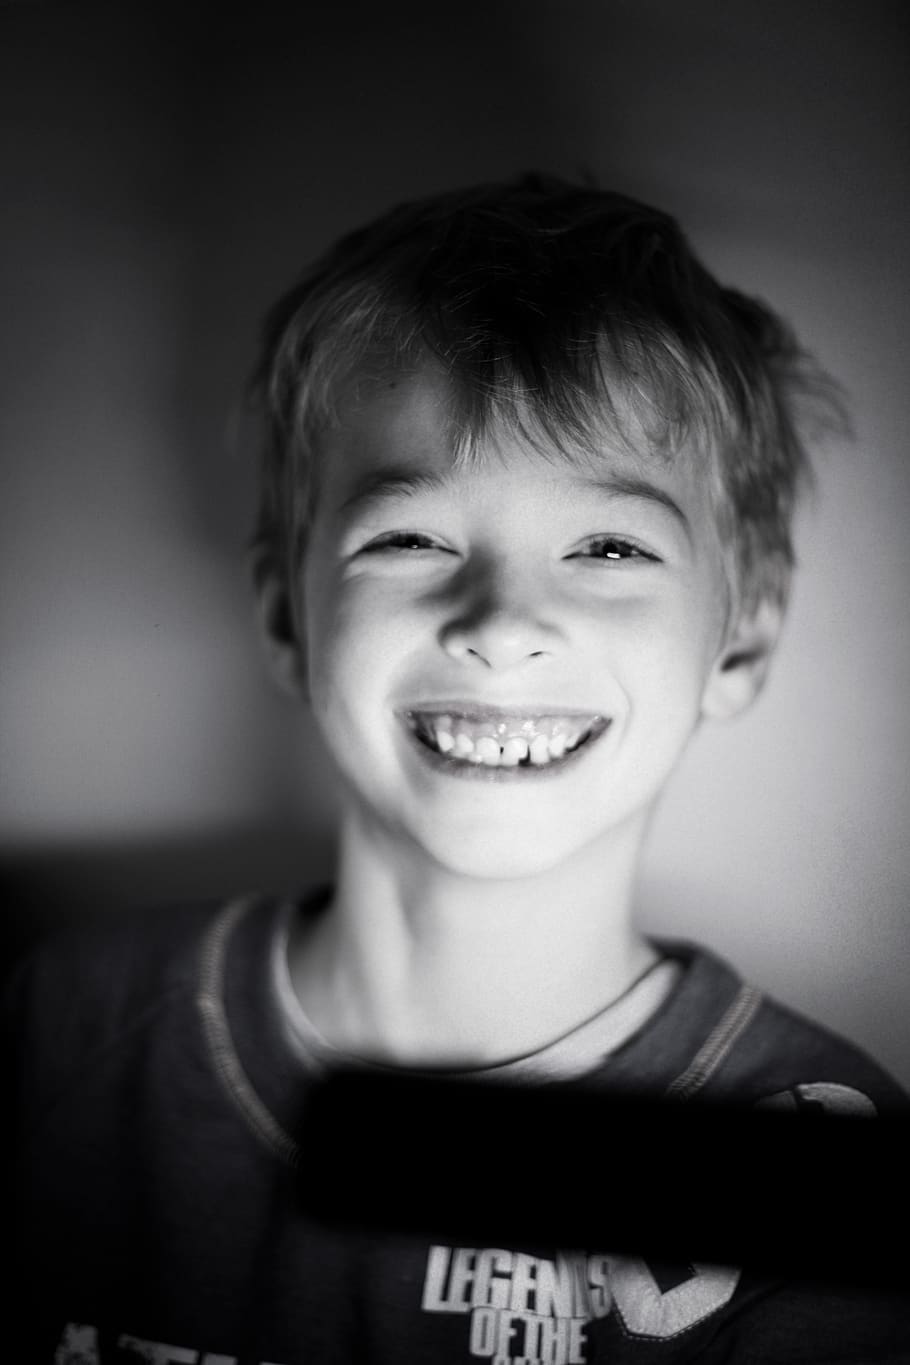 child, smiling, black and white, portrait, happiness, childhood